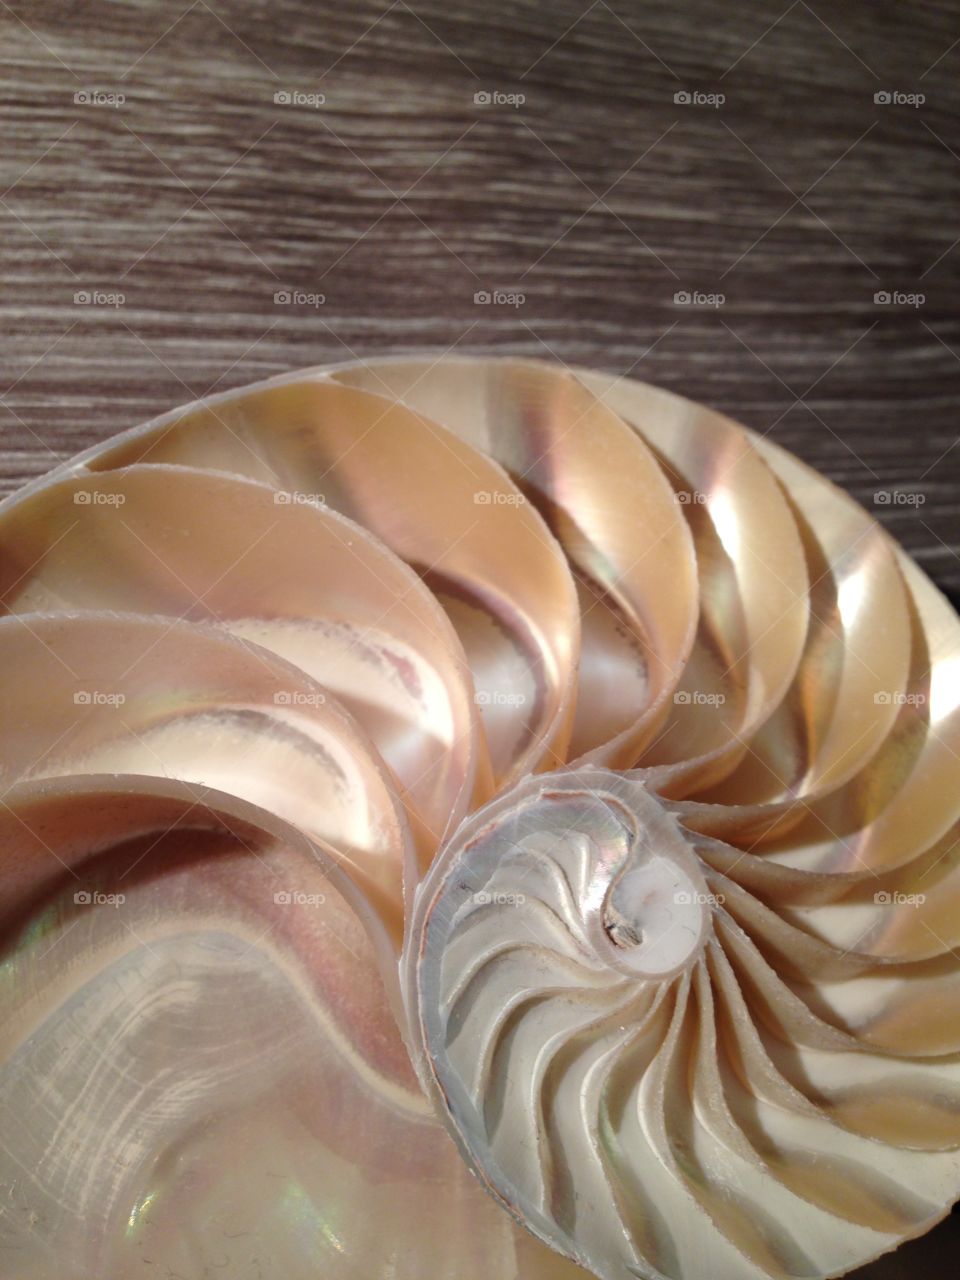 Nautilus shell cross section spiral symmetry 